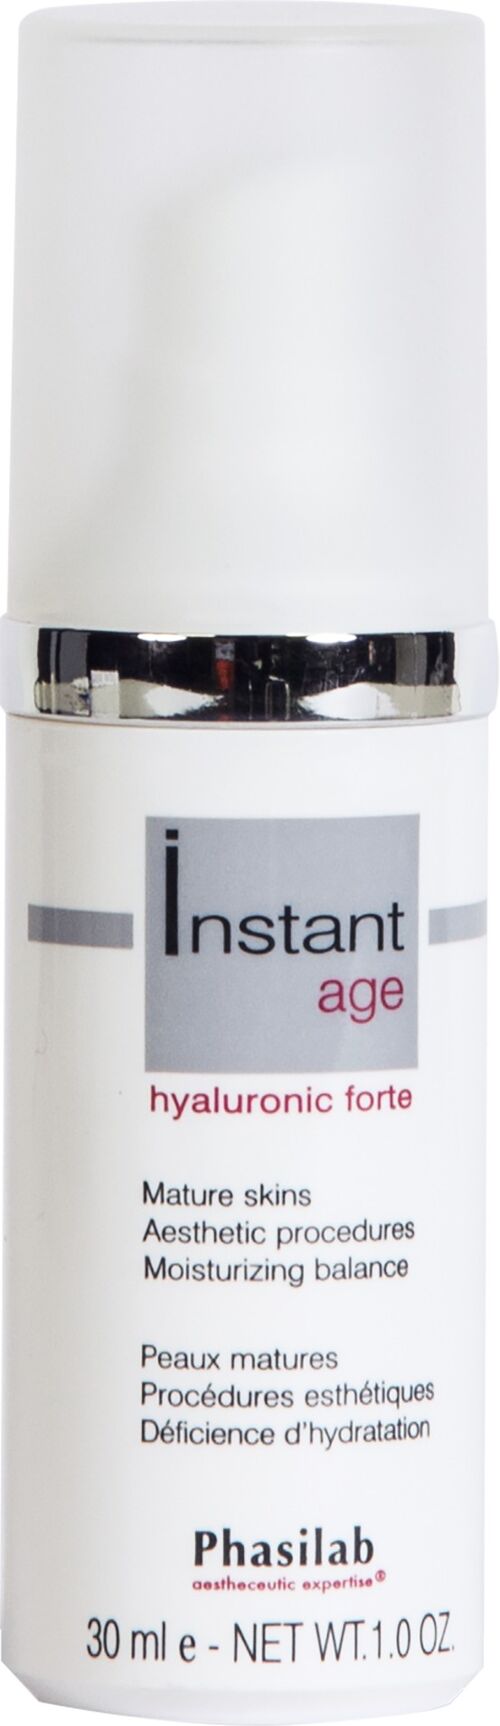 INSTANT AGE HYALURONIC FORTE